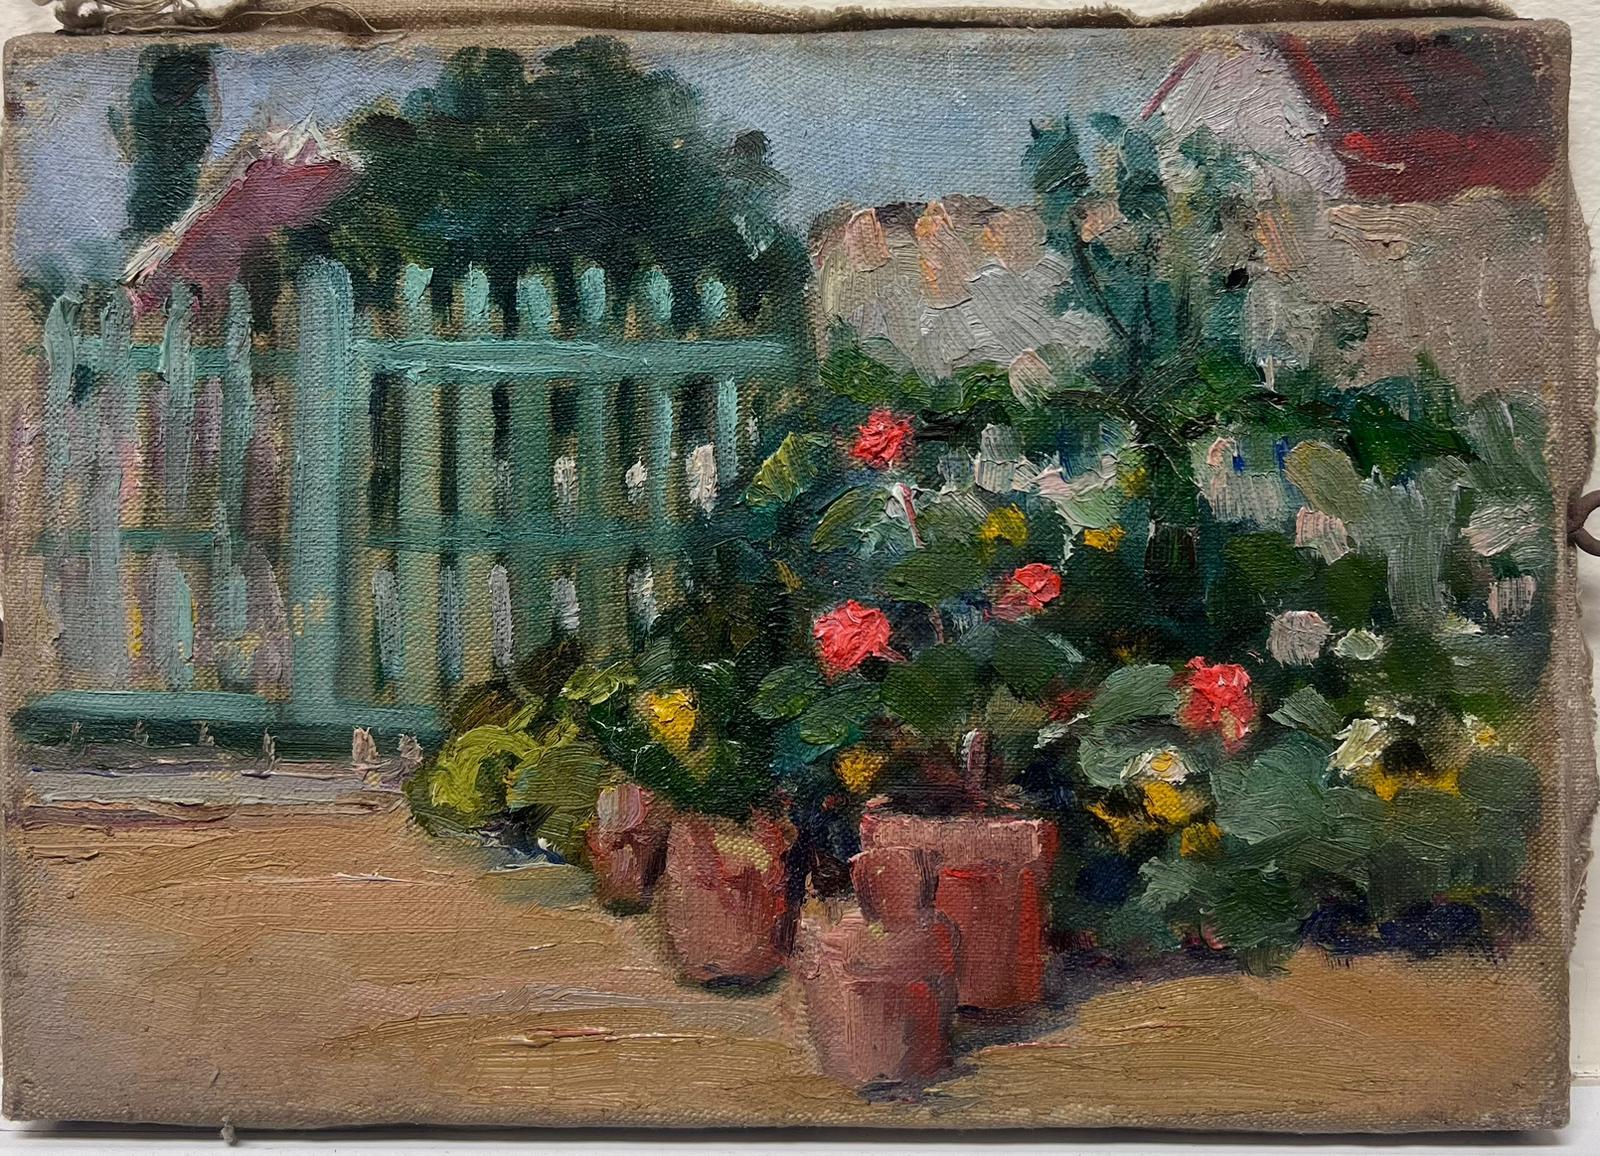 The Flower Garden
by Louise Alix (French, 1888-1980) *see notes below
provenance stamp to the back 
oil painting on canvas, unframed
measures: 7.75 high by 10.5 inches wide
condition: overall very good and sound, a few scuffs and marks to the